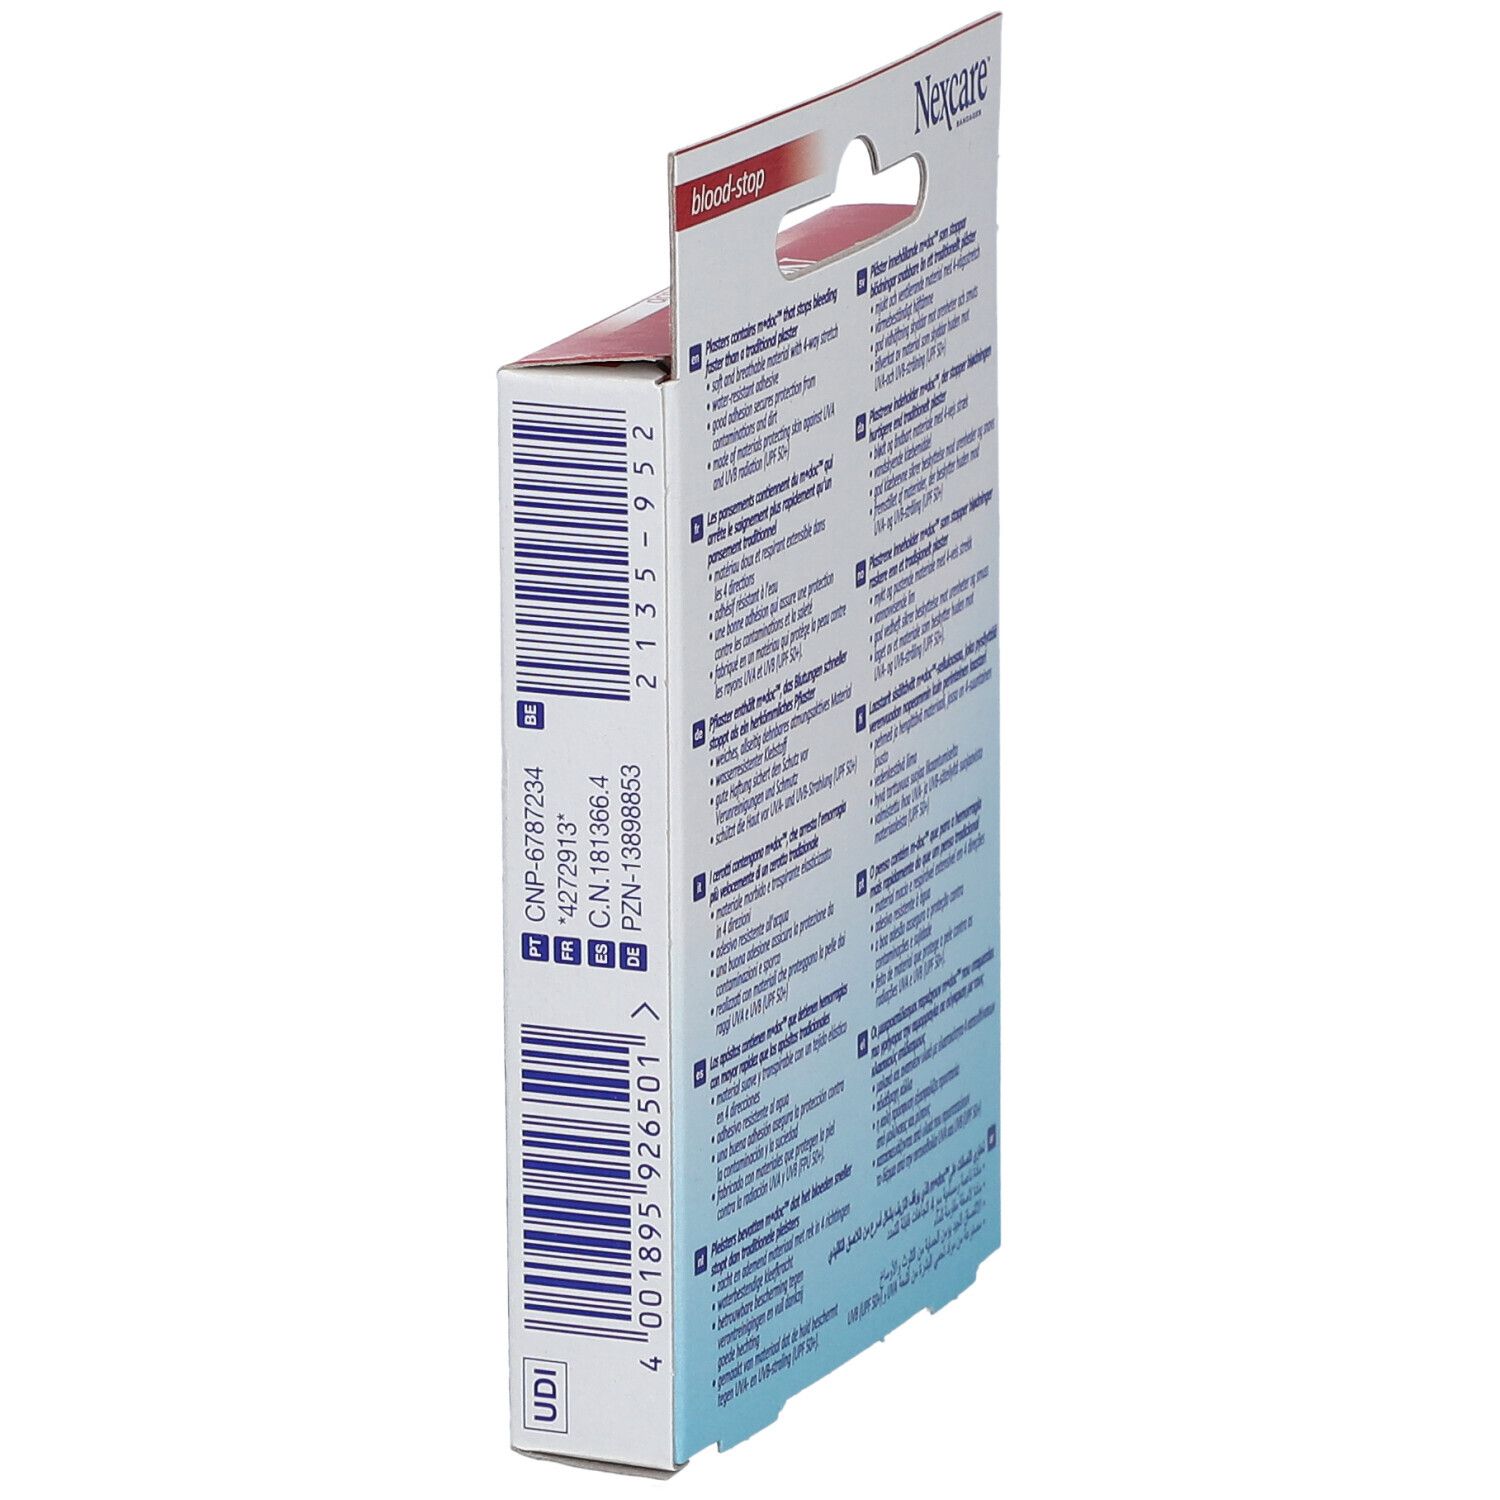 Nexcare Bandages Blood Stop Strips 3 Tailles Assortiment N1730AS